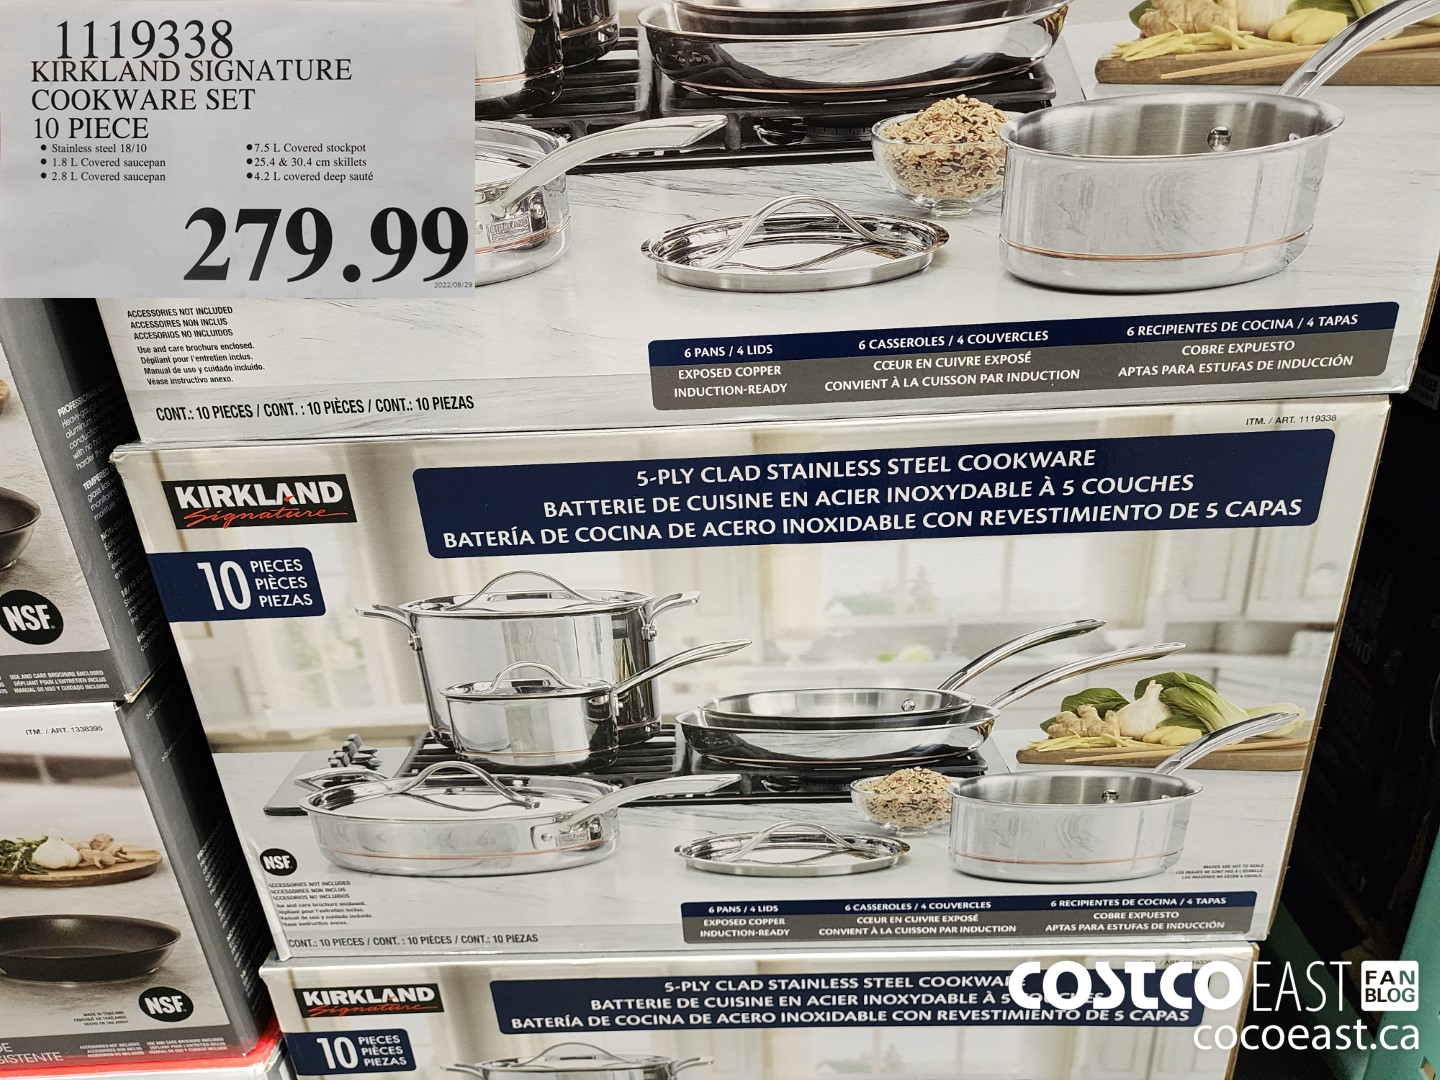 The Kirkland 10-Piece 5-ply Stainless Steel Cookware set is a